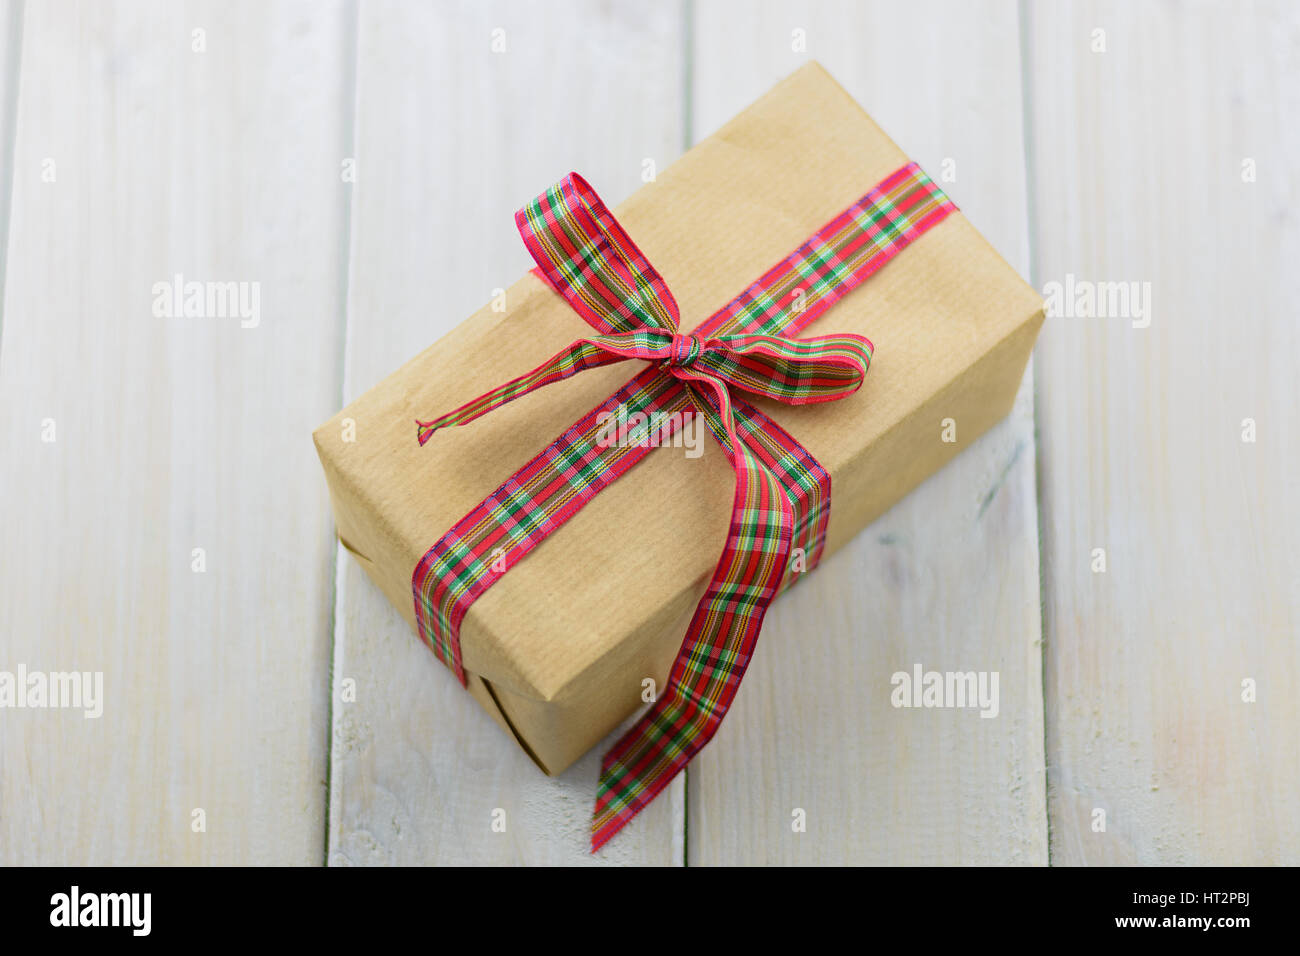 Box with a gift on a wooden table tied with red ribbon. Stock Photo